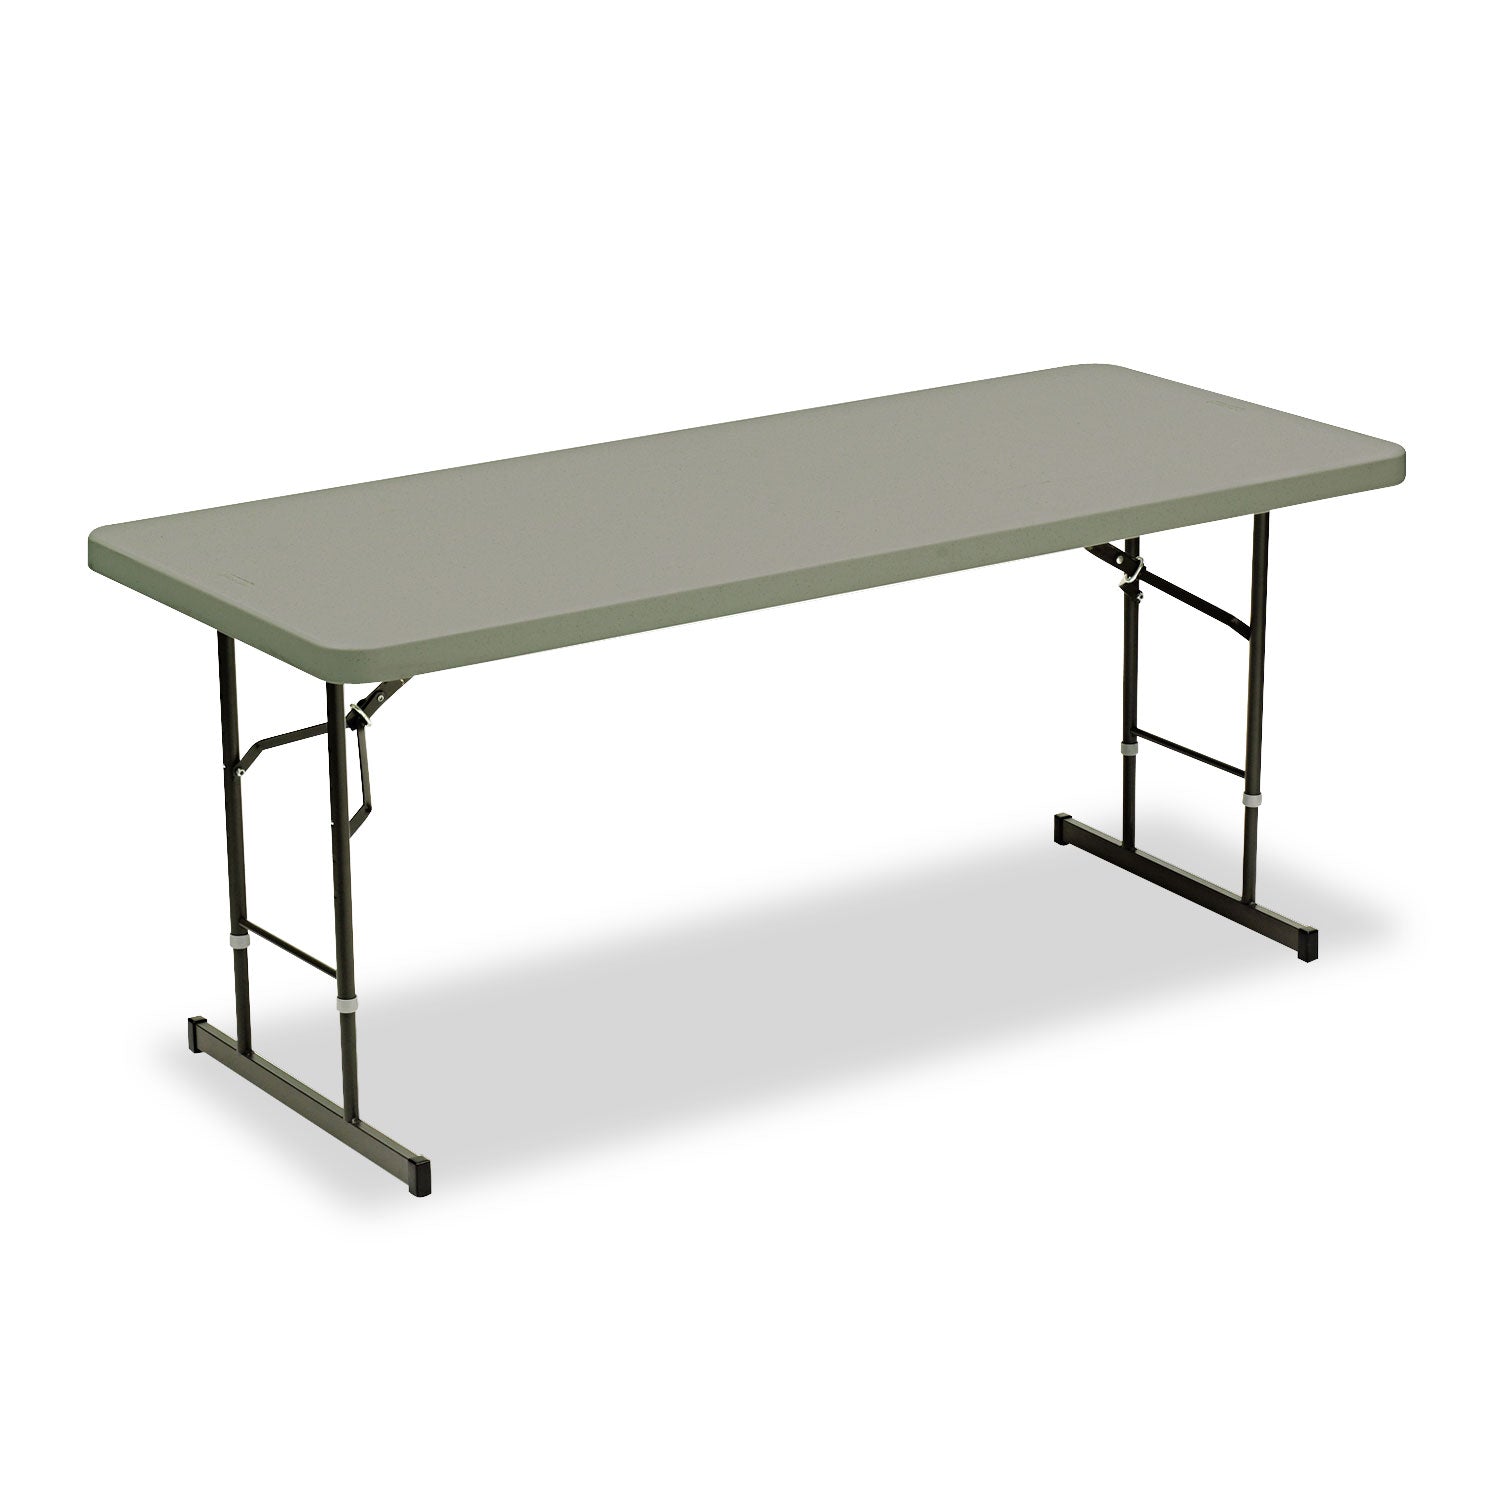 IndestrucTable Classic Adjustable-Height Folding Table, Rectangular, 72" x 30" x 25" to 35", Charcoal - 